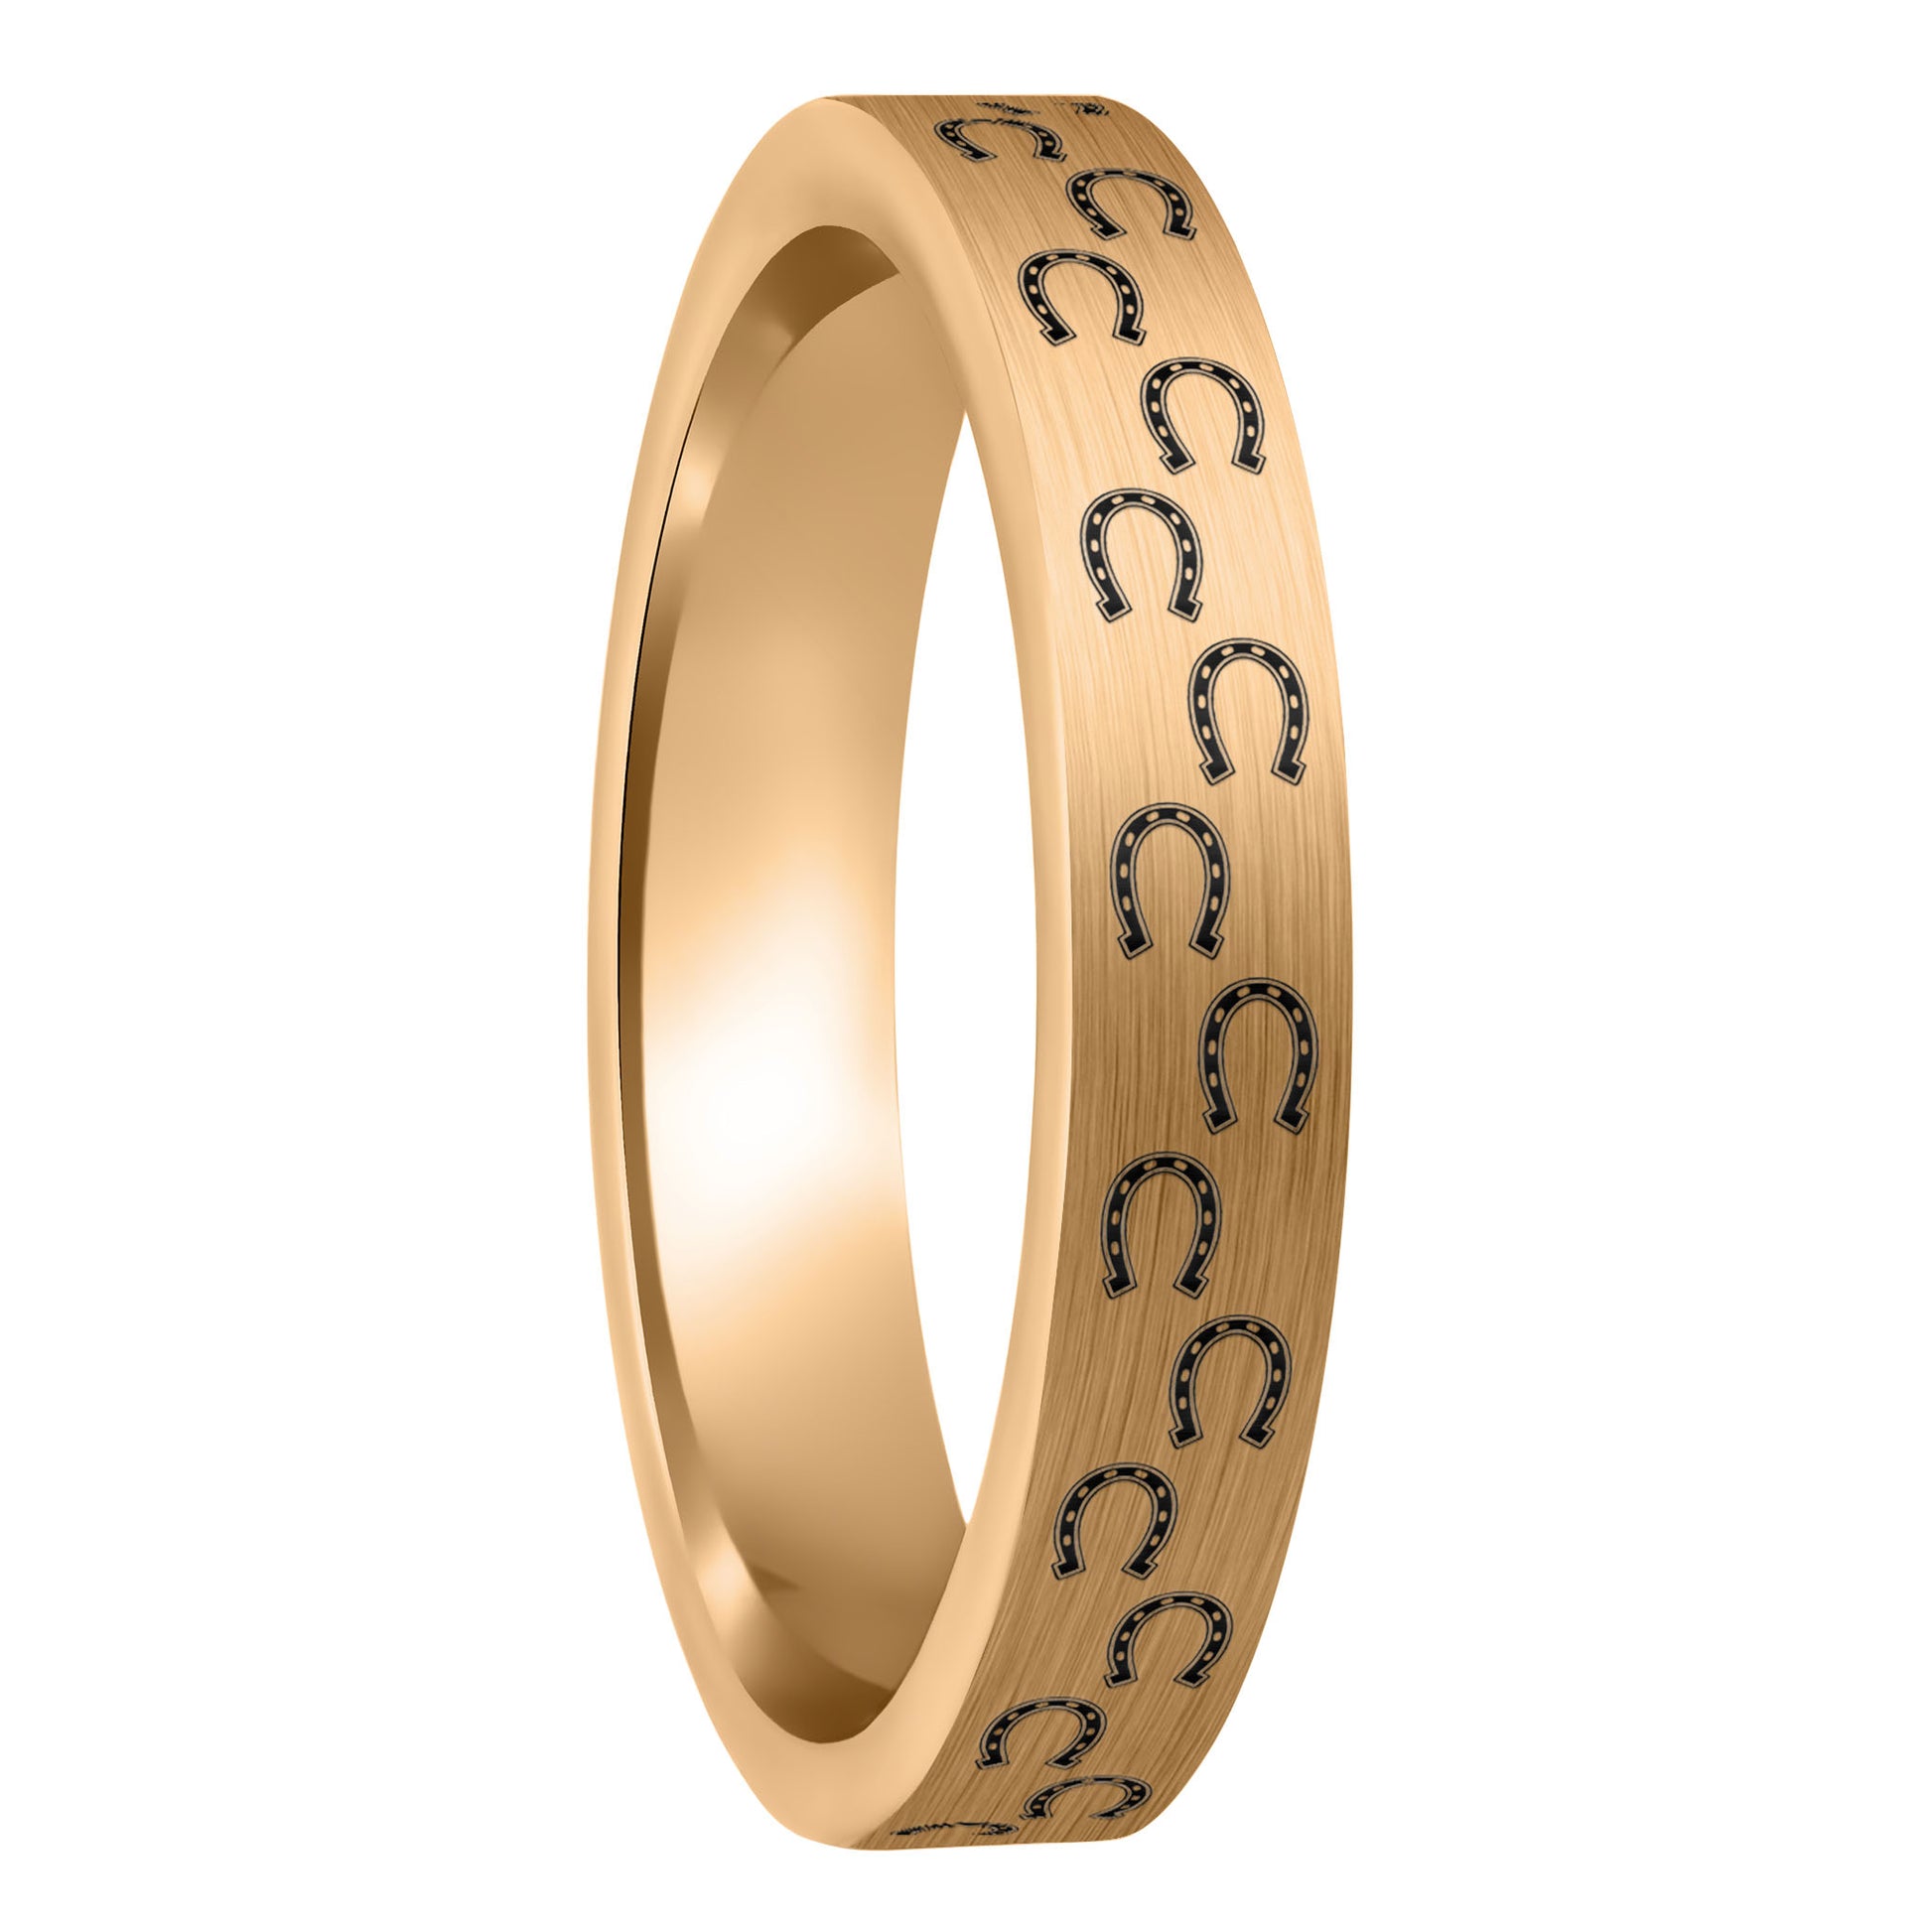 A horseshoes brushed rose gold tungsten women's wedding band displayed on a plain white background.